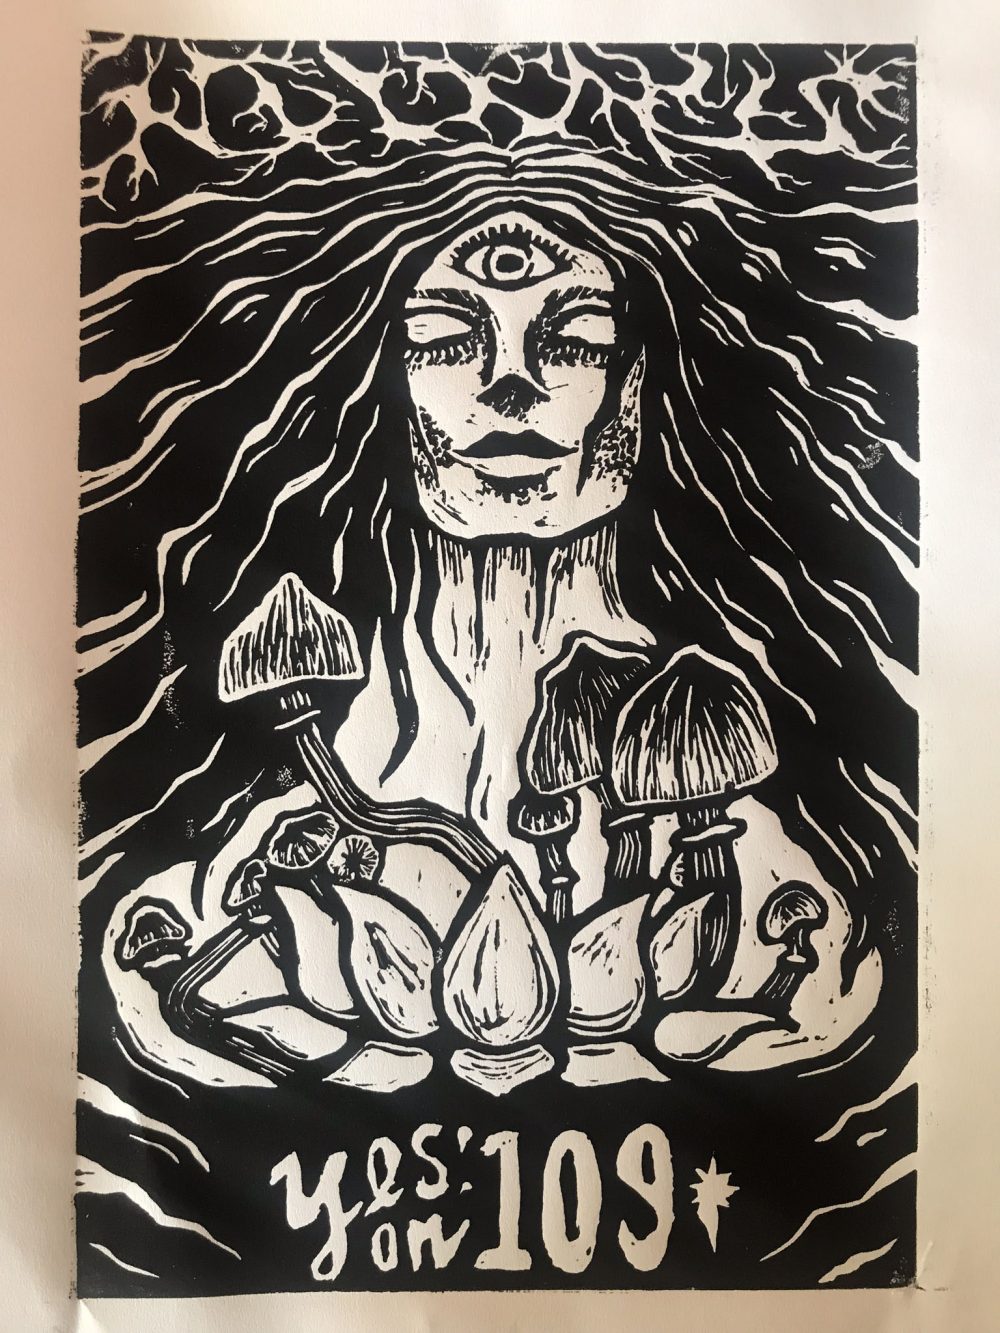 This is a black and white relief print. There is a woman's face with her eyes closed and a third eye on her forehead that is open. Above her head is a representation of firing synapses, which appear like lightening. Her hair is long and black with white highlights, and it becomes the background of the image. Below her face are Psilocybin mushrooms growing up from behind a lotus flower. Under the flower, text reads "Yes! on 109".